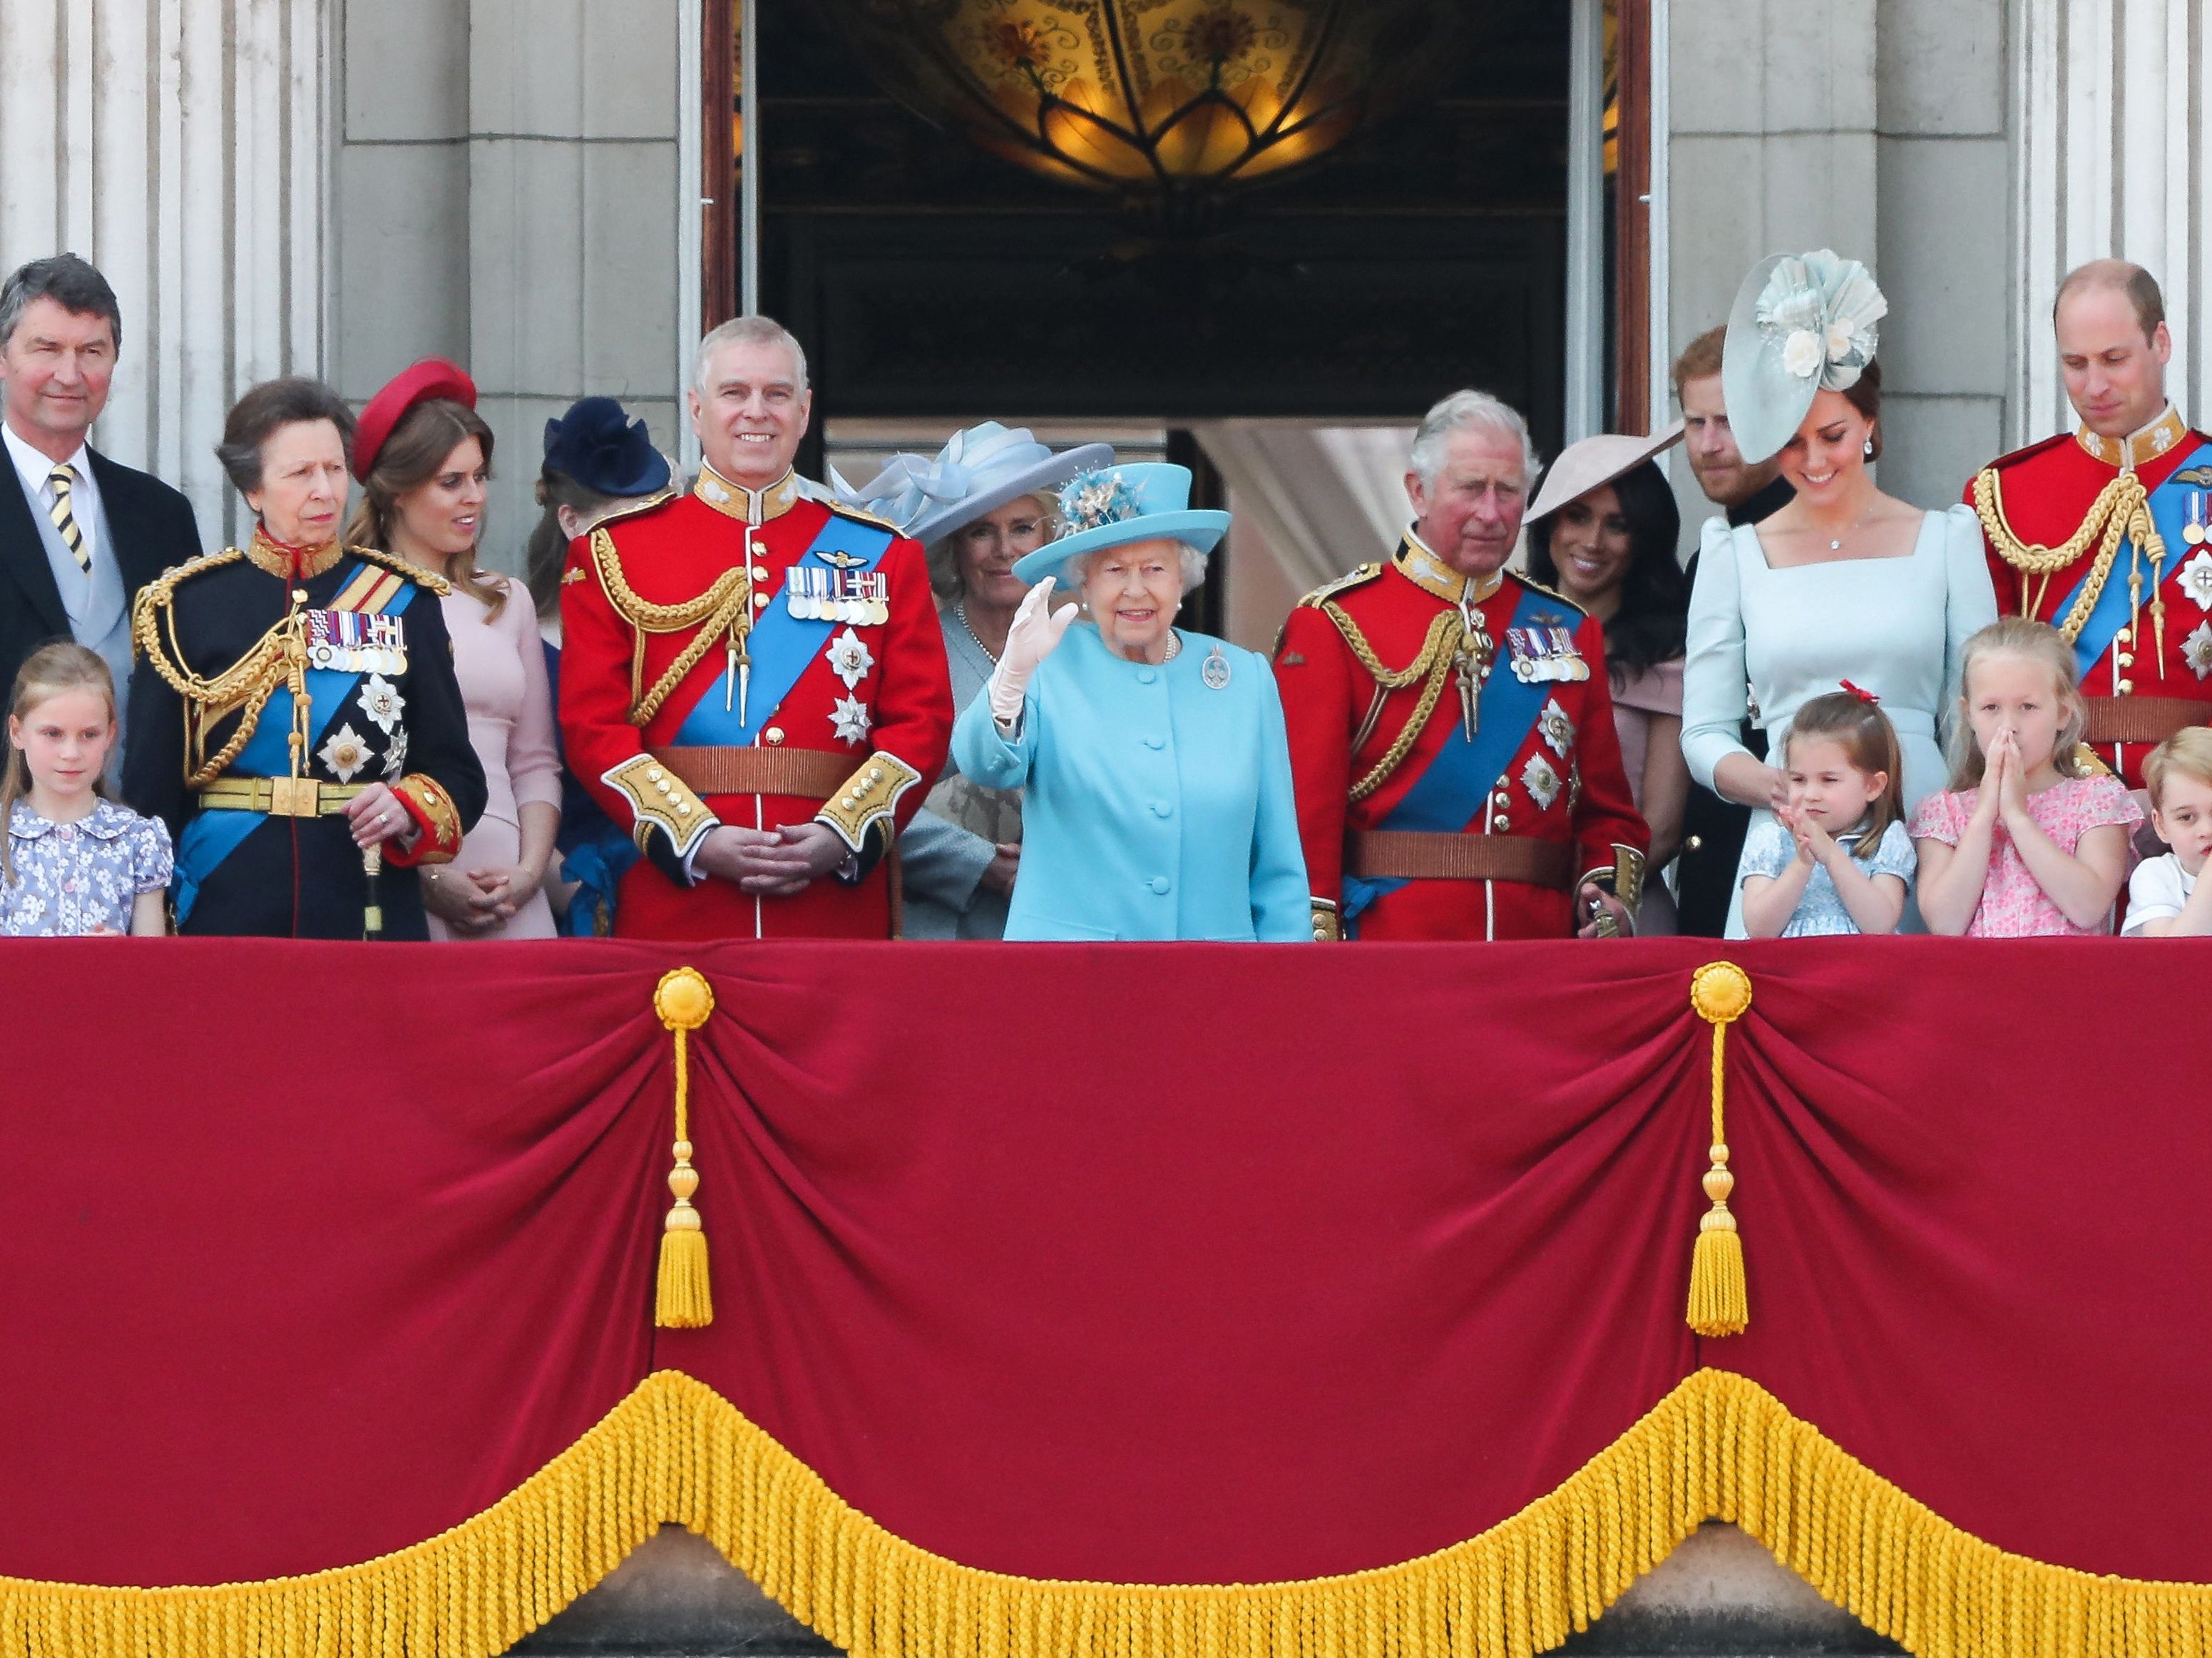 Members of the Royal Family (L-R) Vice Admiral Timothy Laurence, Britain's Princess Anne, Princess Royal, Britain's Princess Beatrice of York, Britain's Prince Andrew, Duke of York, Britain's Camilla, Duchess of Cornwall, Britain's Queen Elizabeth II, Britain's Prince Charles, Prince of Wales, Britain's Meghan, Duchess of Sussex, Britain's Prince Harry, Duke of Sussex, Britain's Catherine, Duchess of Cambridge (with Princess Charlotte and Prince George) and Britain's Prince William, Duke of Cambridge, stand on the balcony of Buckingham Palace to watch a fly-past of aircraft by the Royal Air Force